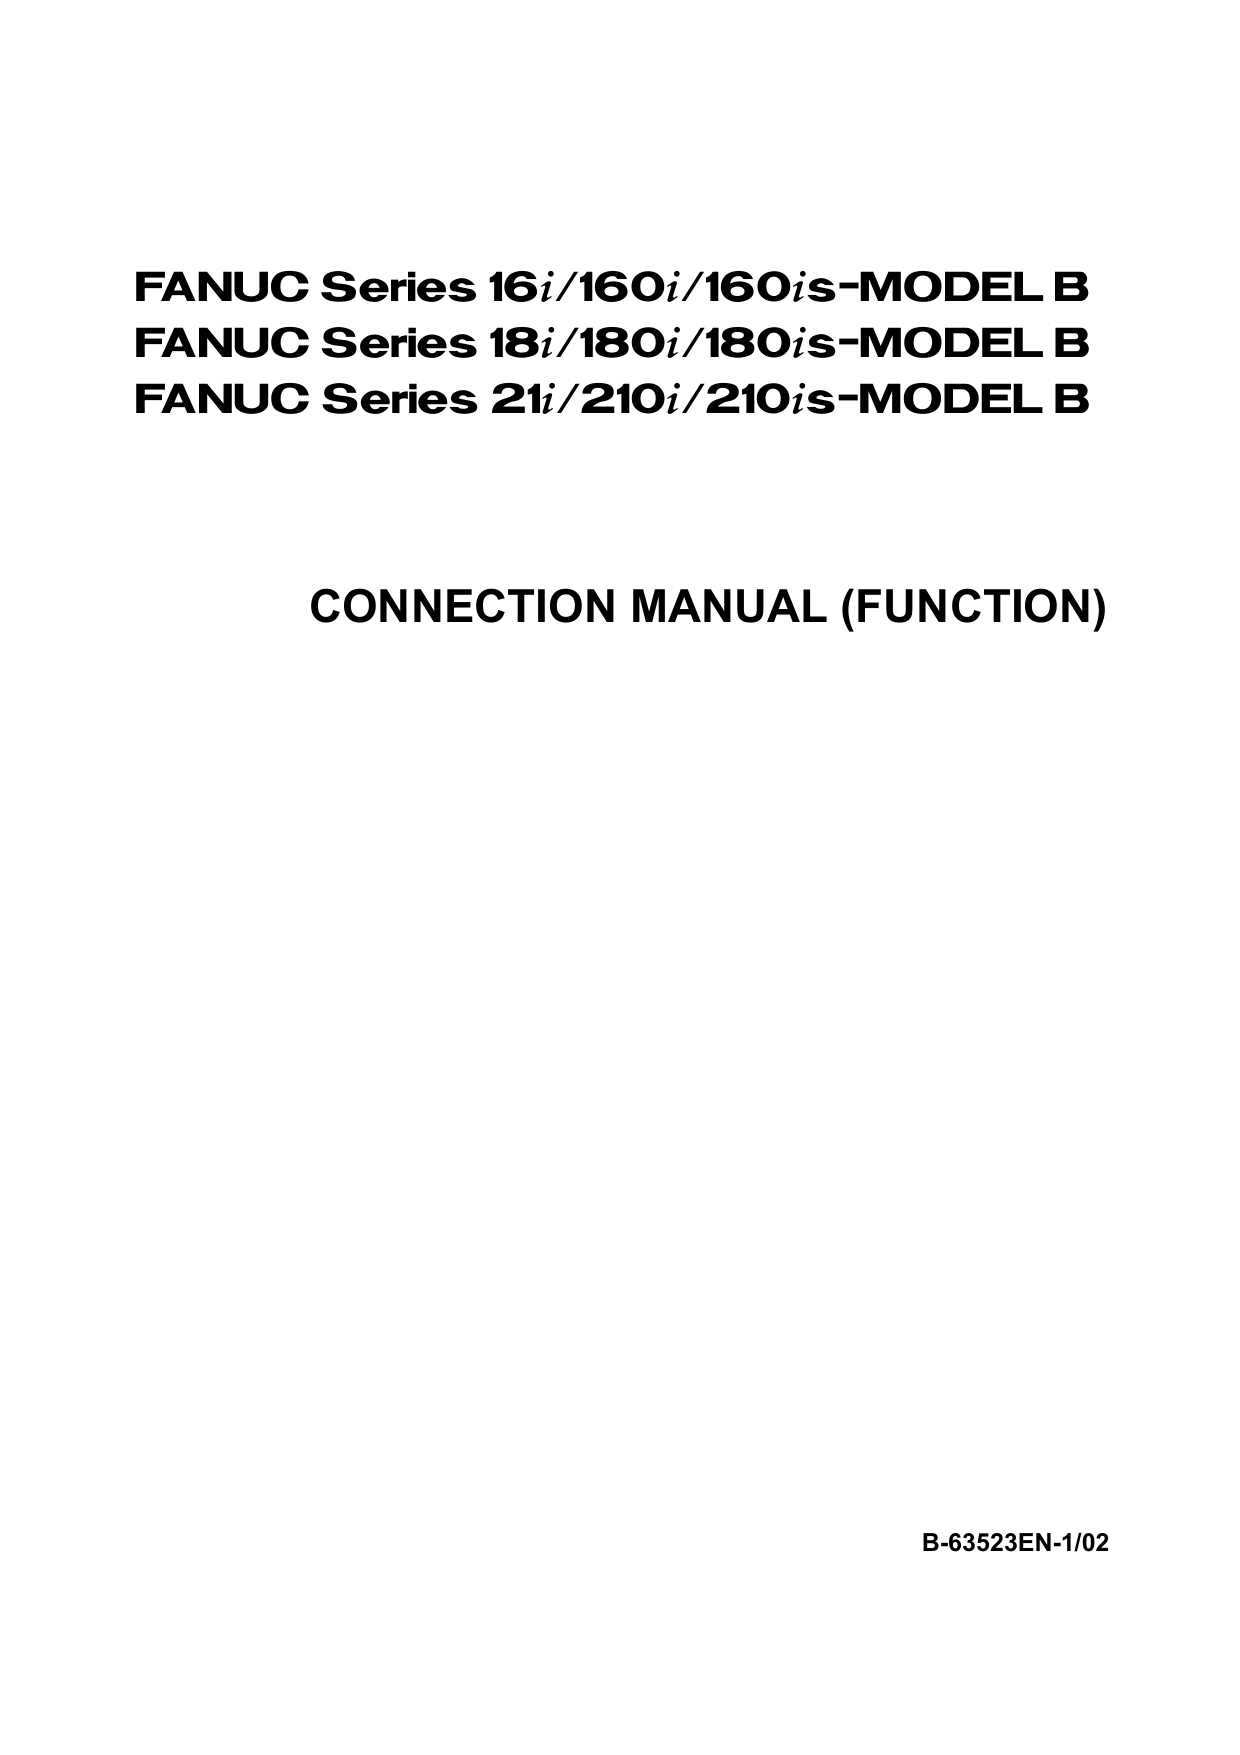 CONNECTION MANUAL (FUNCTION) | Manualzz